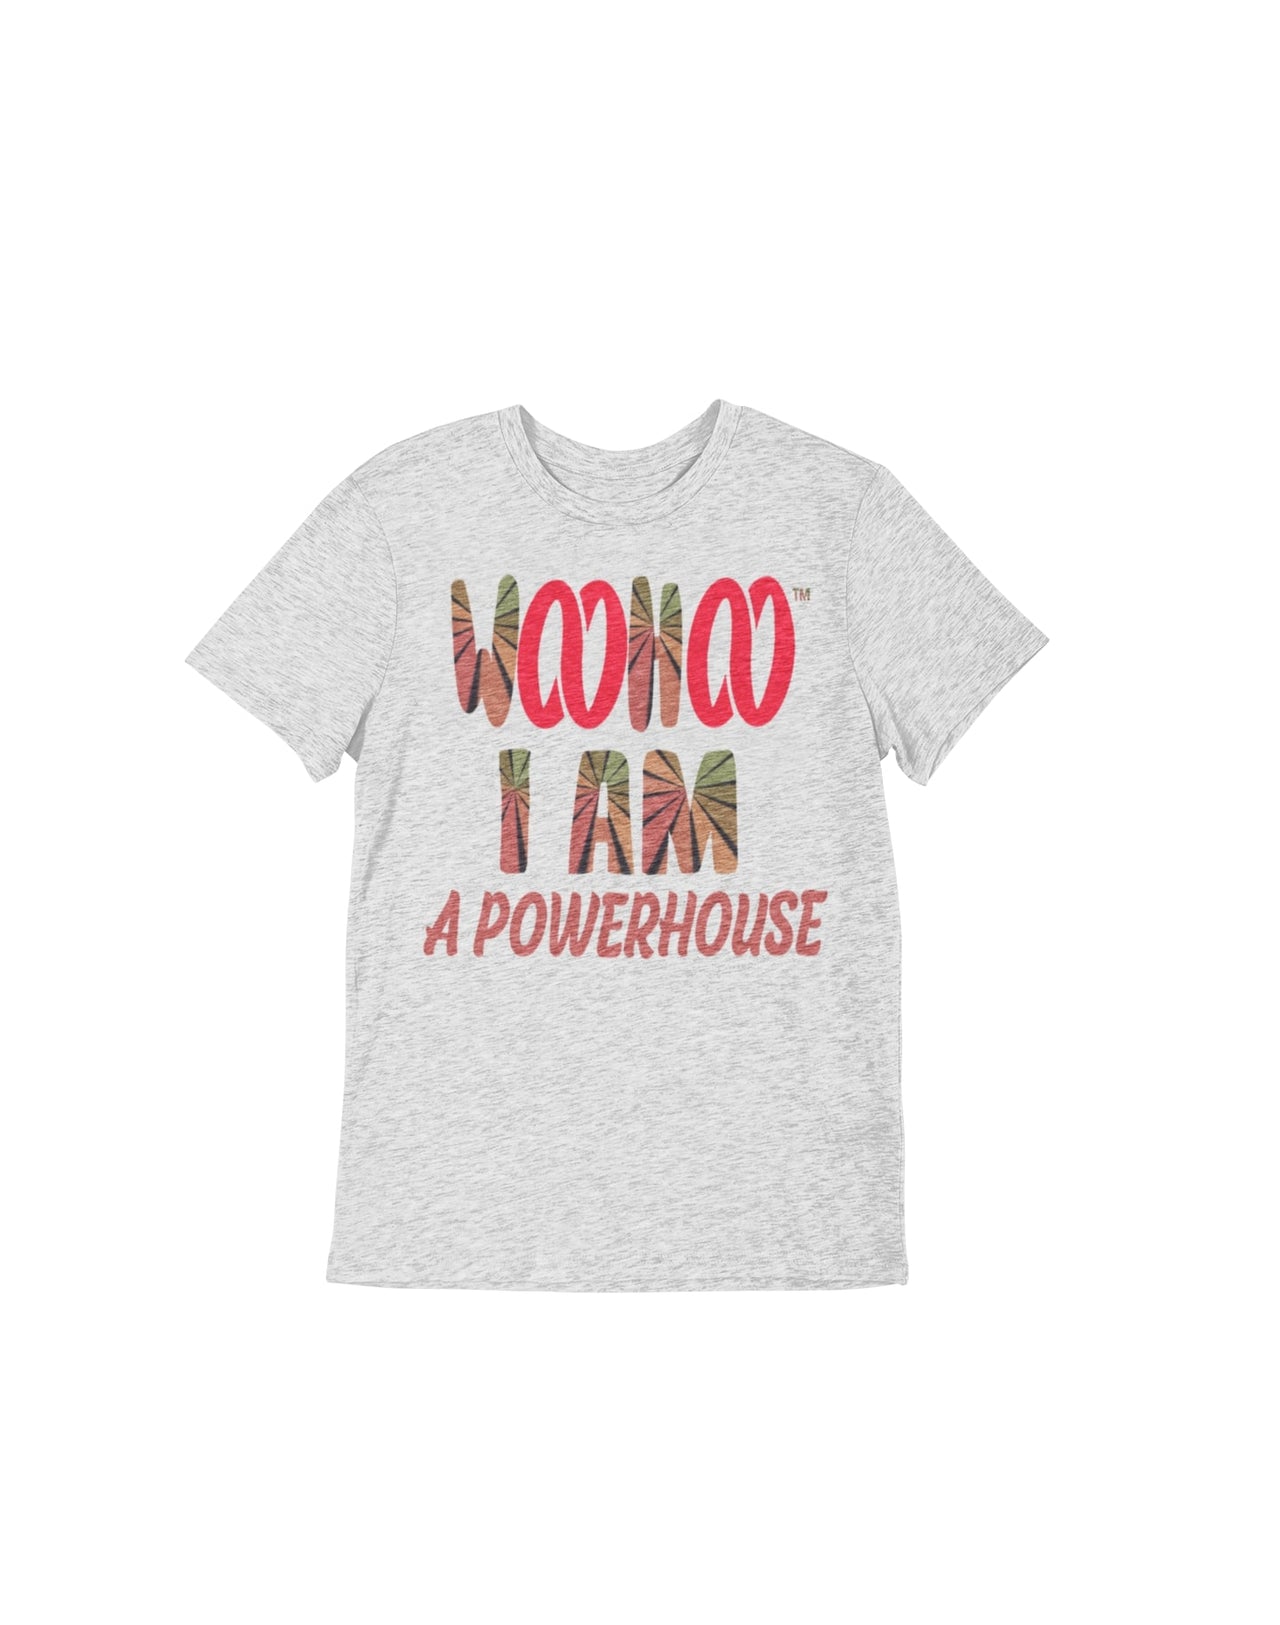 Heather Gray Unisex T-shirt featuring the text 'WooHoo I Am a Powerhouse' in a cool font, designed by WooHoo Apparel.